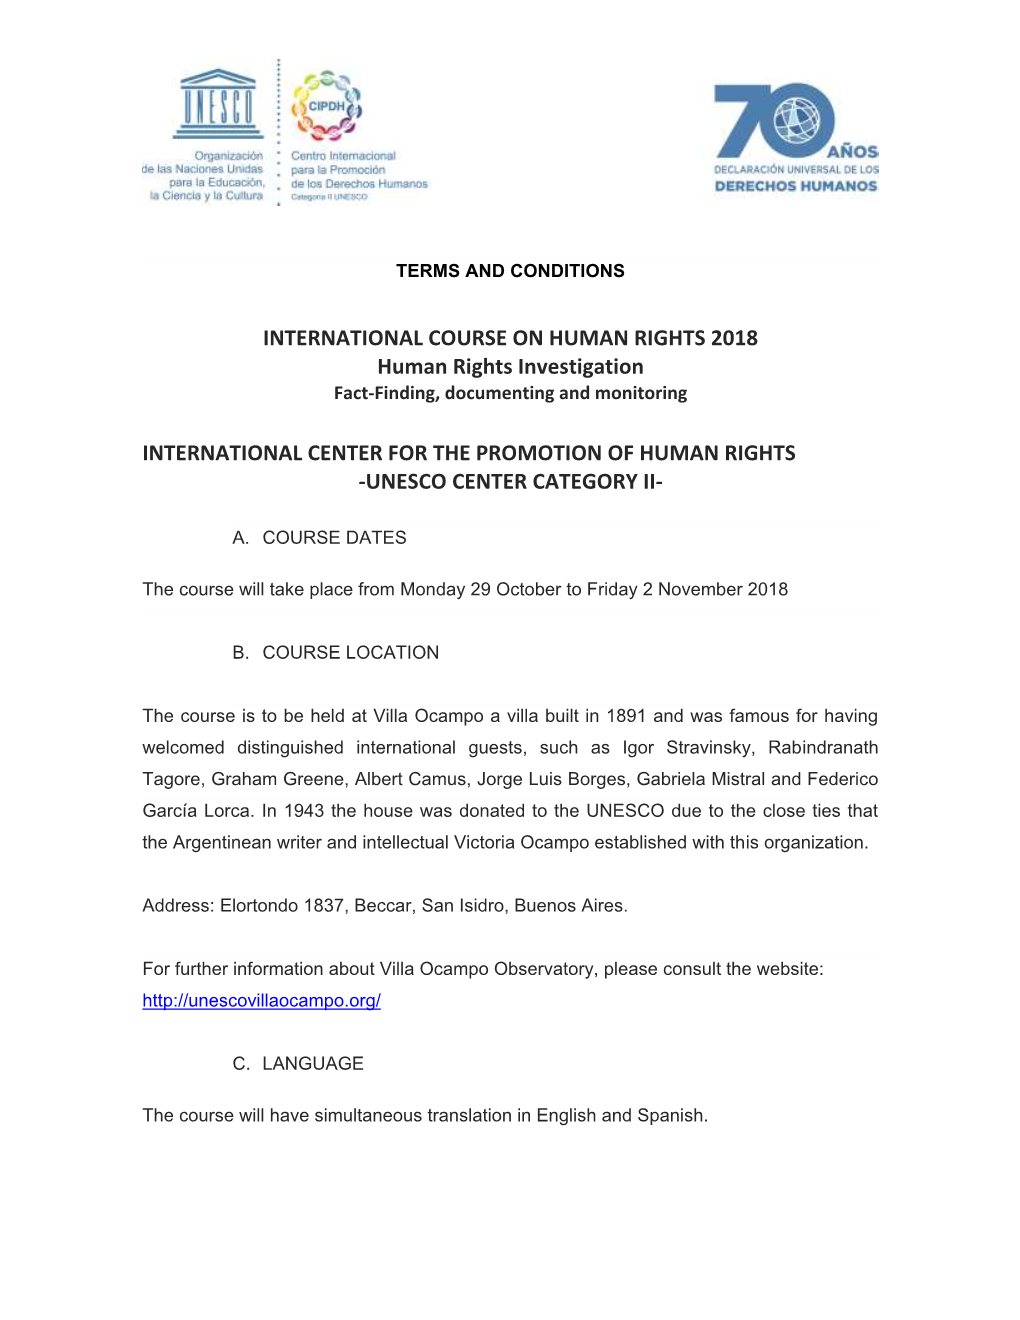 URSE on HUMAN RIGHTS 2018 Human Rights Investigation Fact-Finding, Documenting and Monitoring